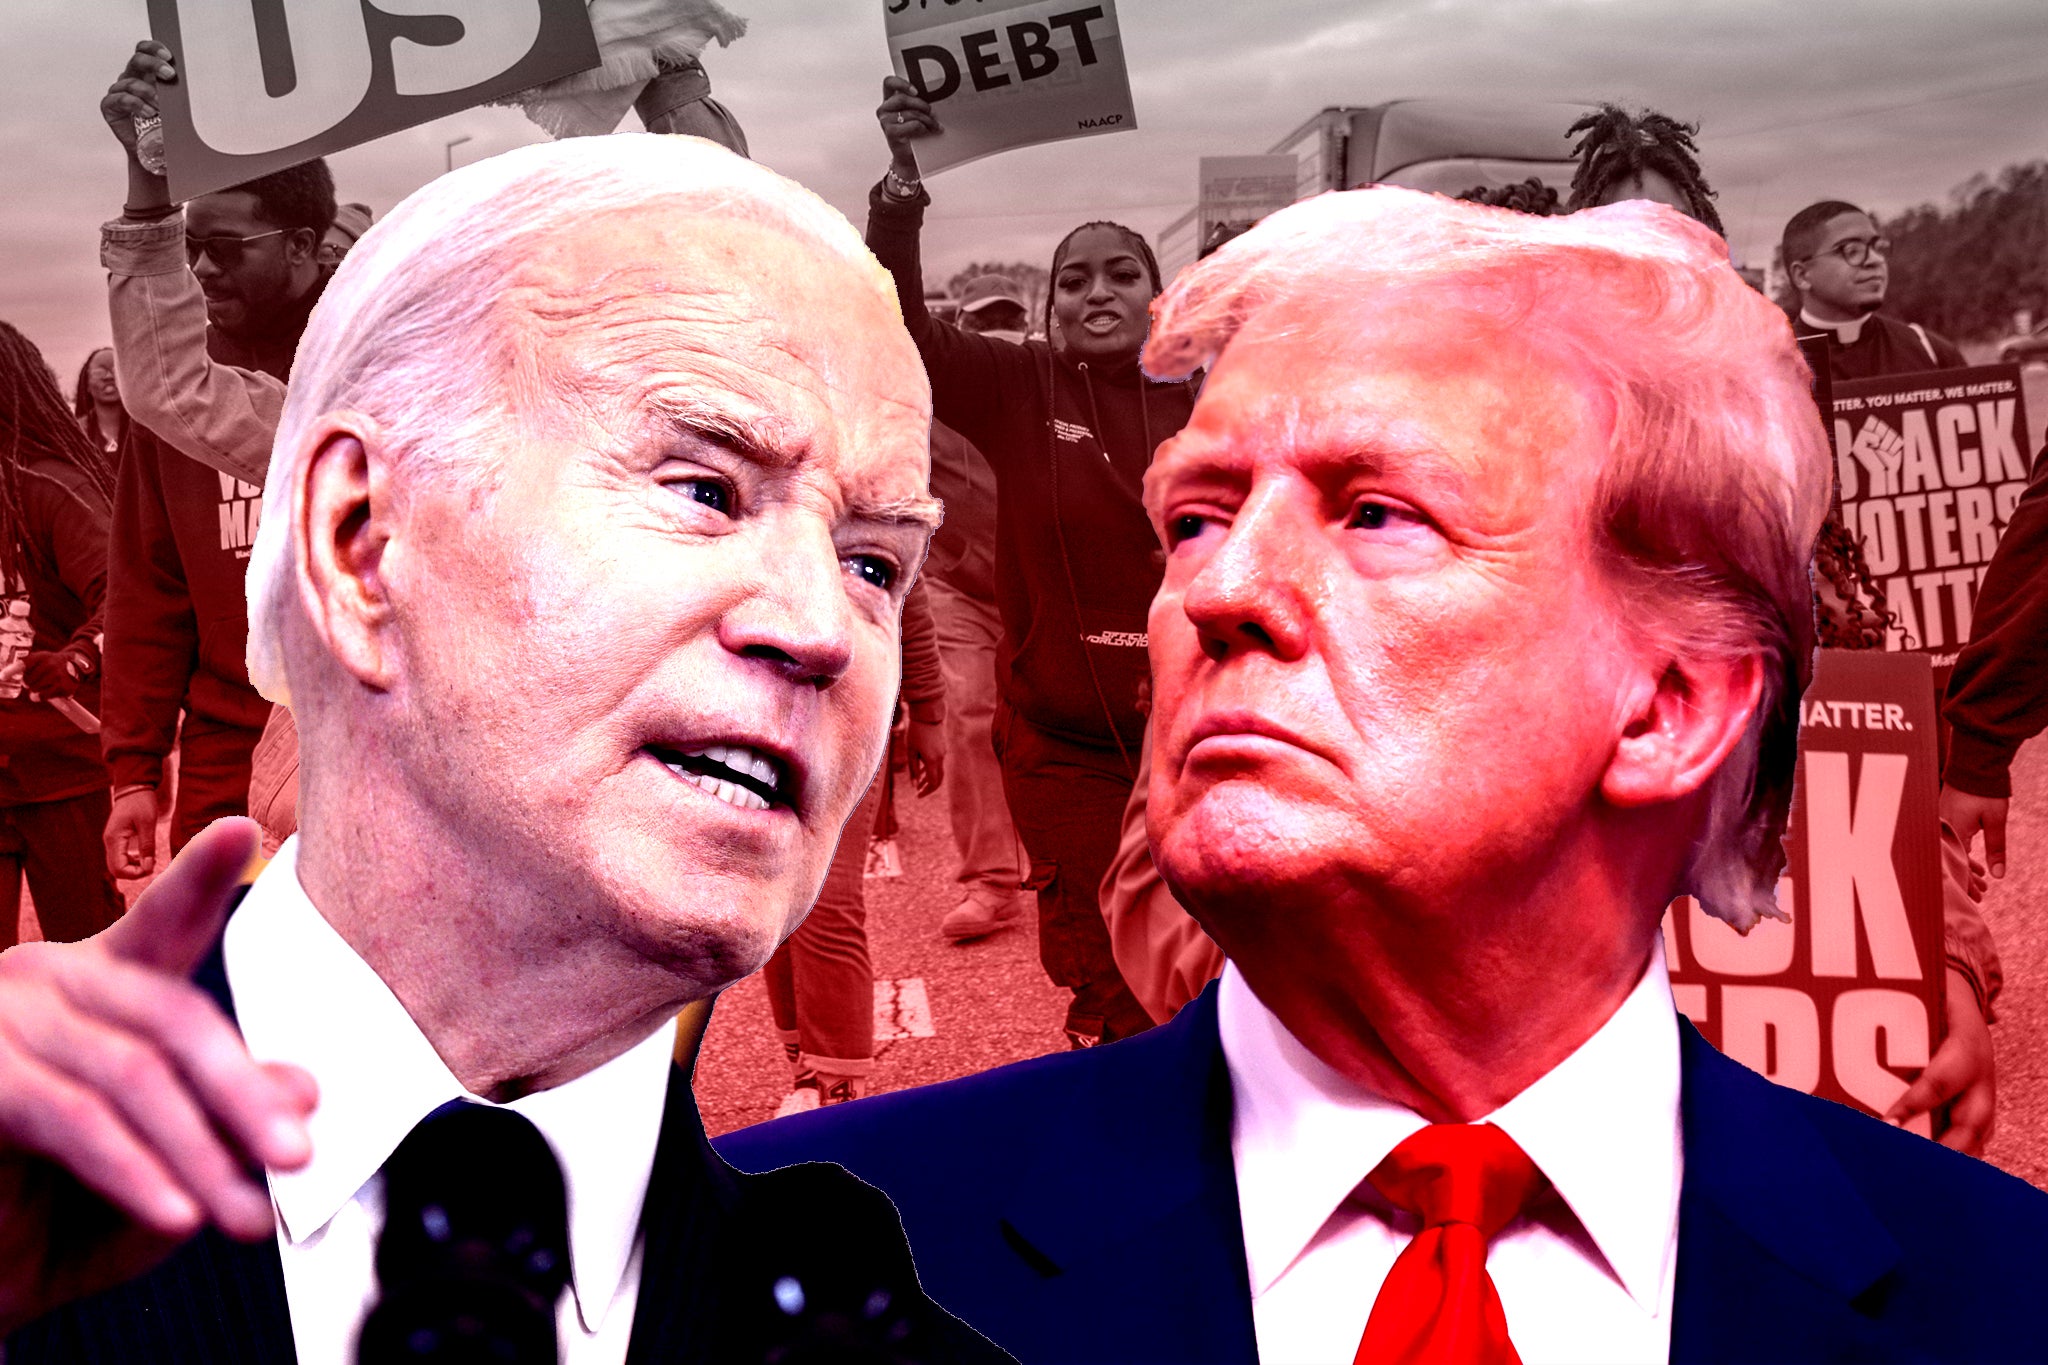 Trump insiders believe he could claim half of Black voters, who voted overwhelmingly for Biden in 2020